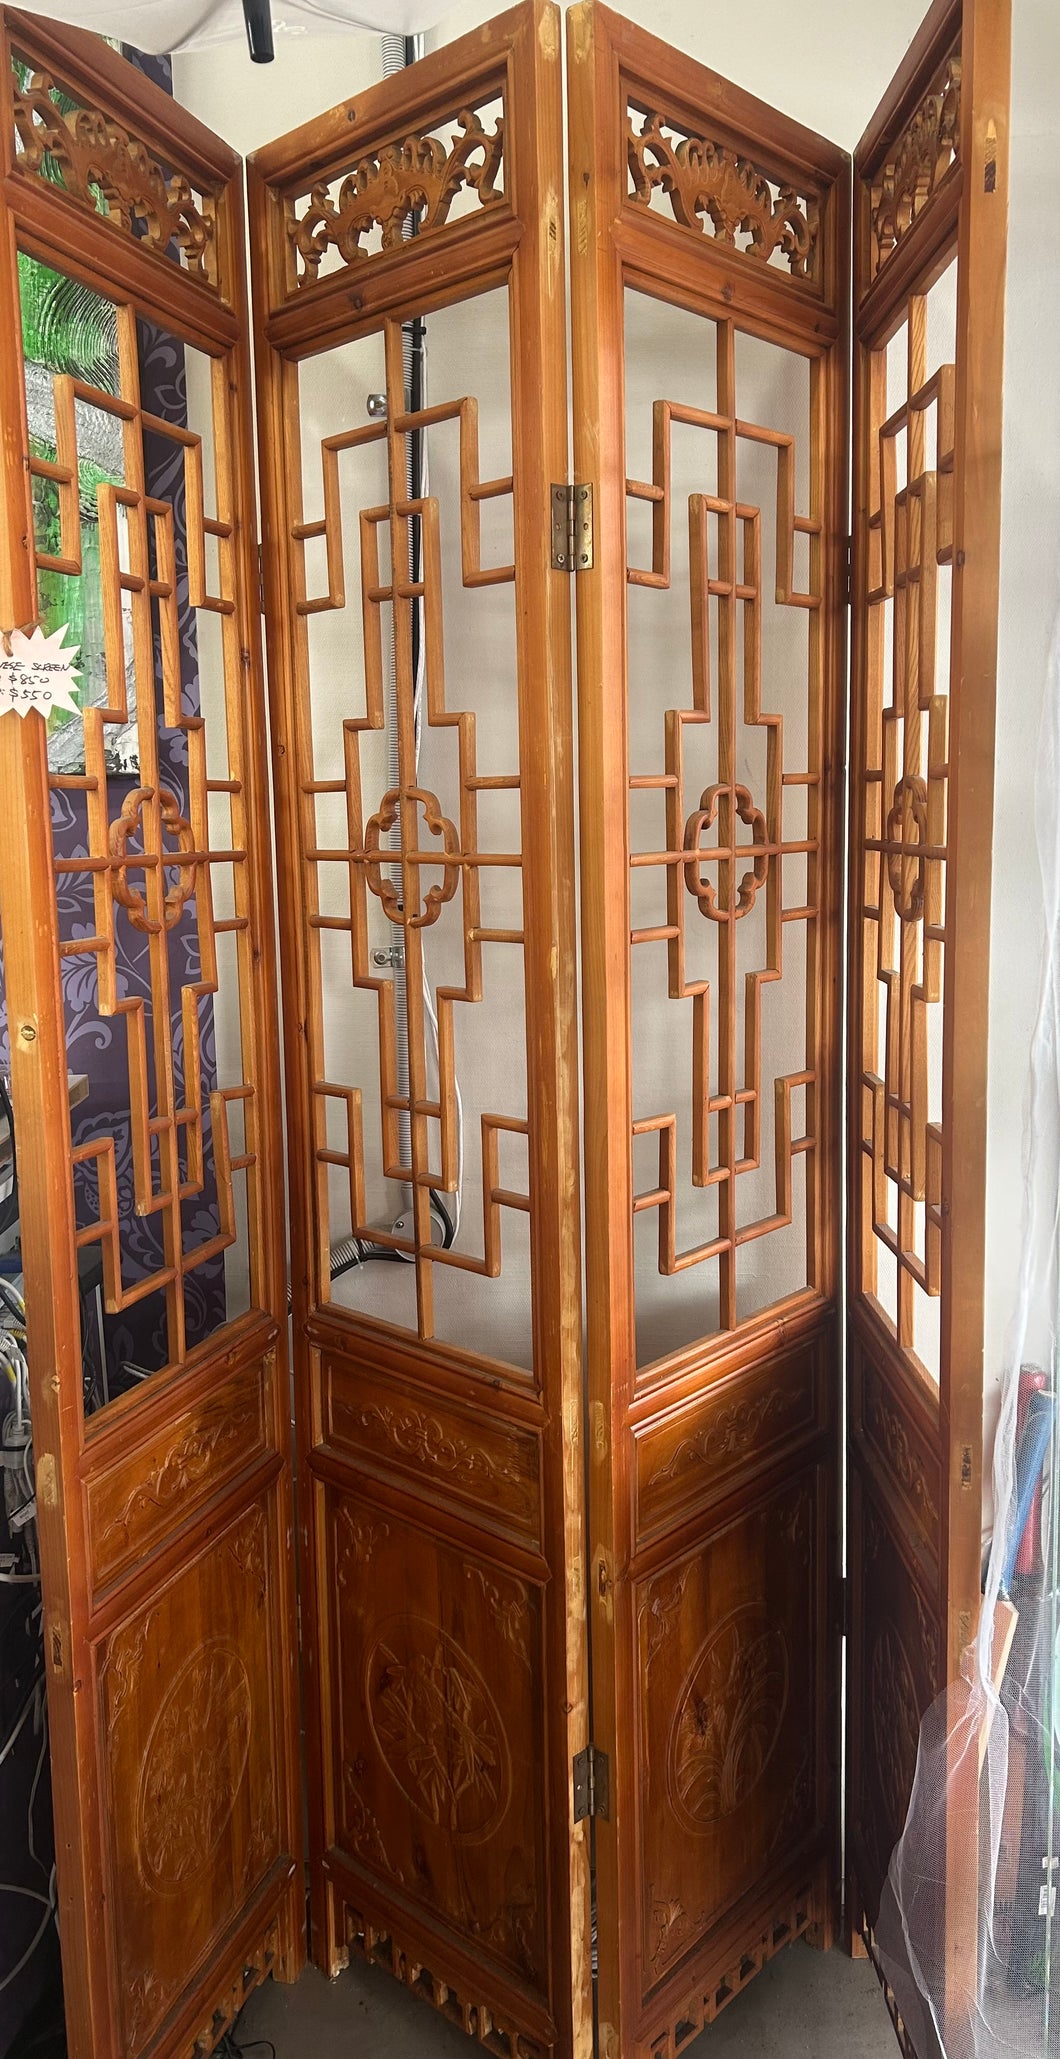 CHINESE WOODEN SCREEN 45CM*4PCS 210CM HIGH (PICK UP ONLY)